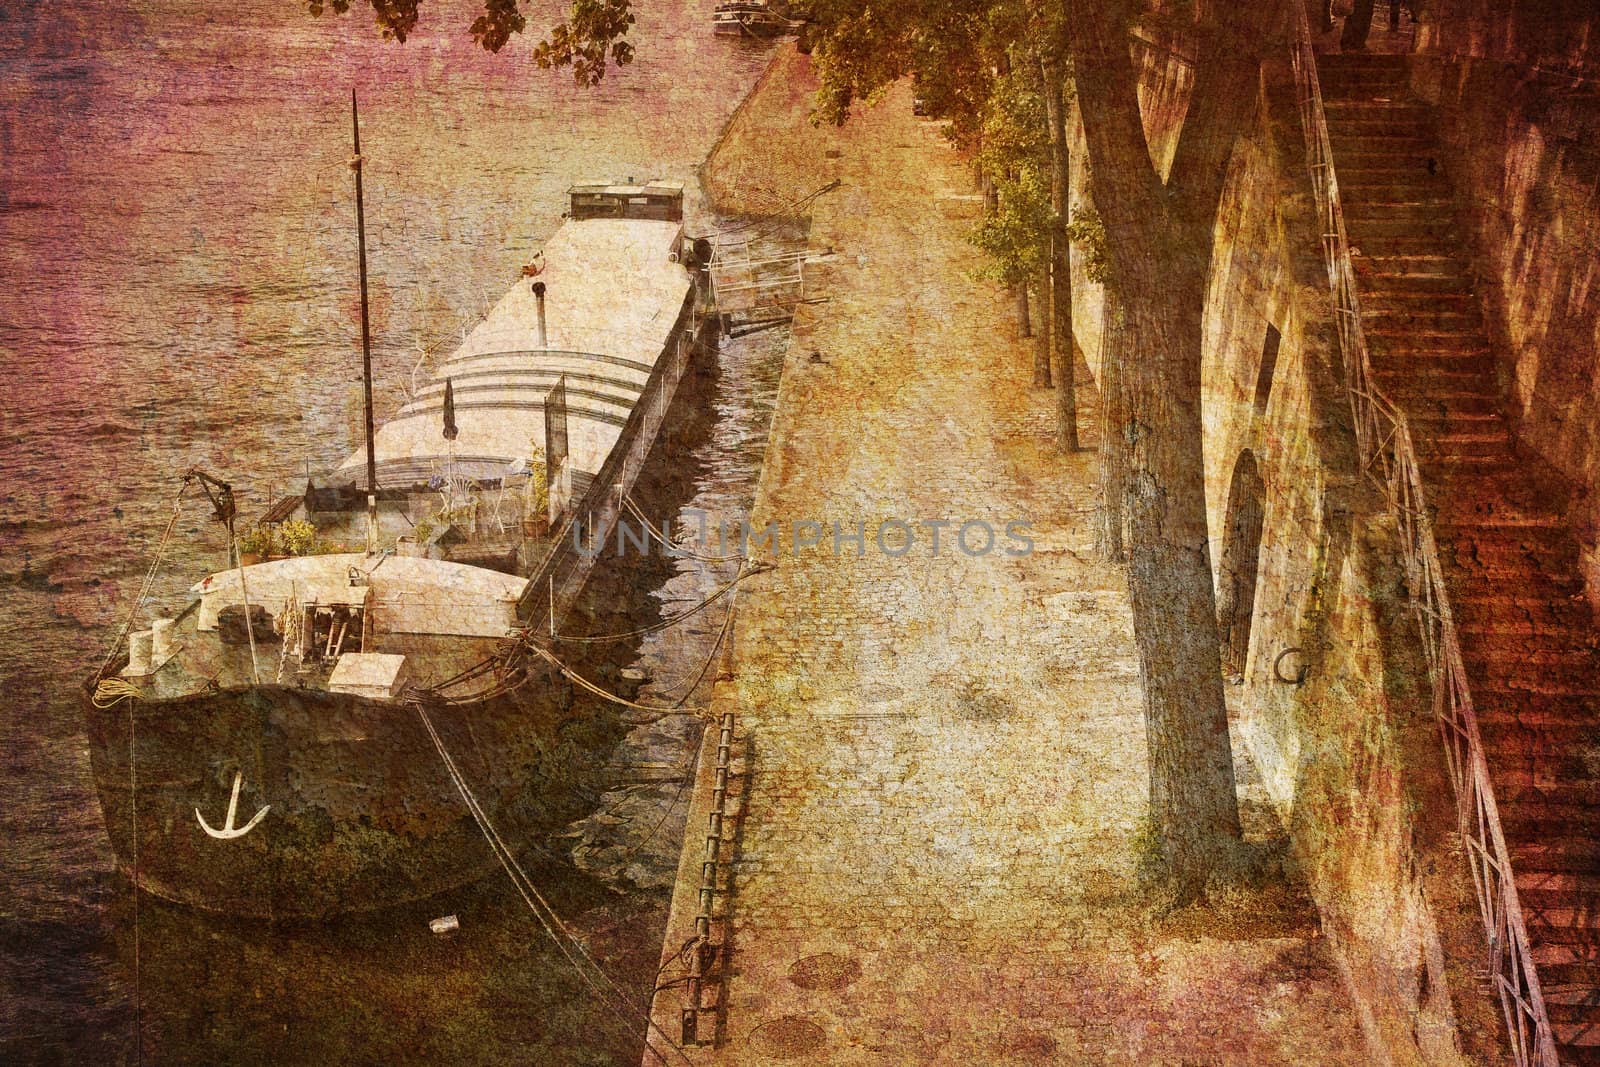 Like an old Japanese print. Several of my photos worked together to make a dreamlike retro look. Dream of a summer day along the River Seine, Paris, France.